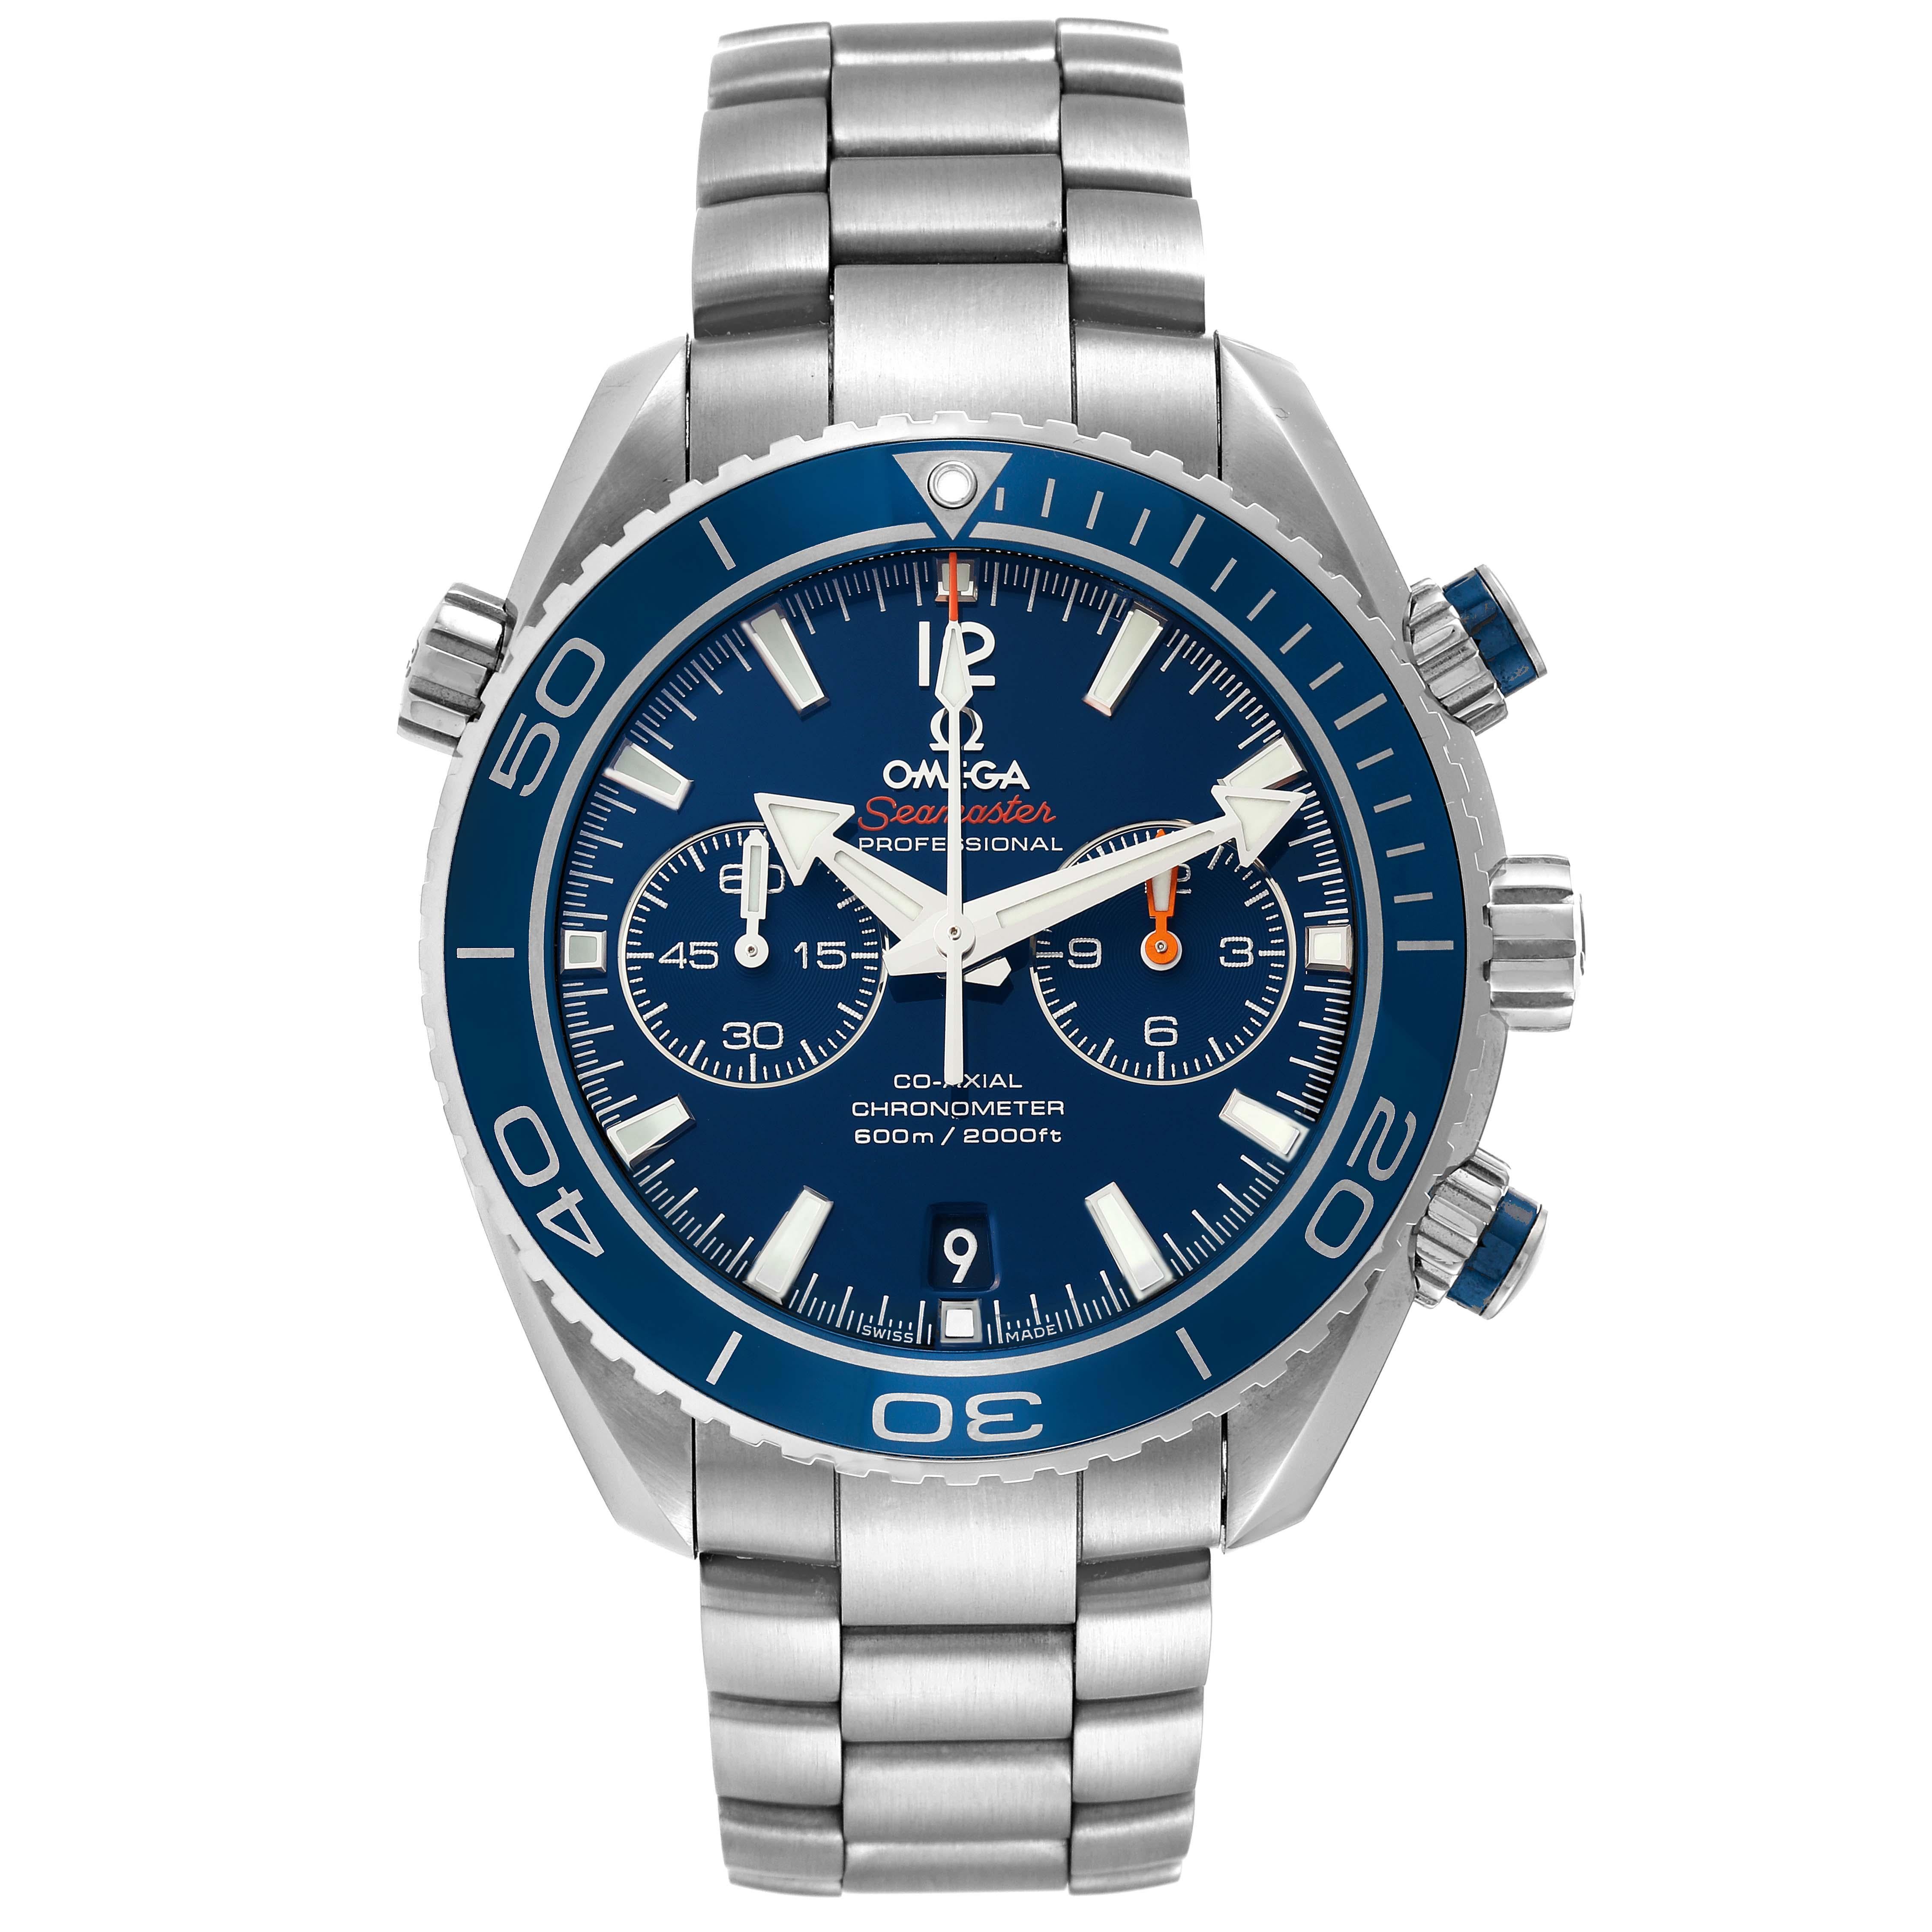 Omega Planet Ocean Chronograph Titanium Mens Watch 232.90.46.51.03.001 Box Card. Automatic self-winding chronometer movement with Co-Axial Escapement for greater precision, stability and durability. Silicon balance spring on free sprung balance, 2